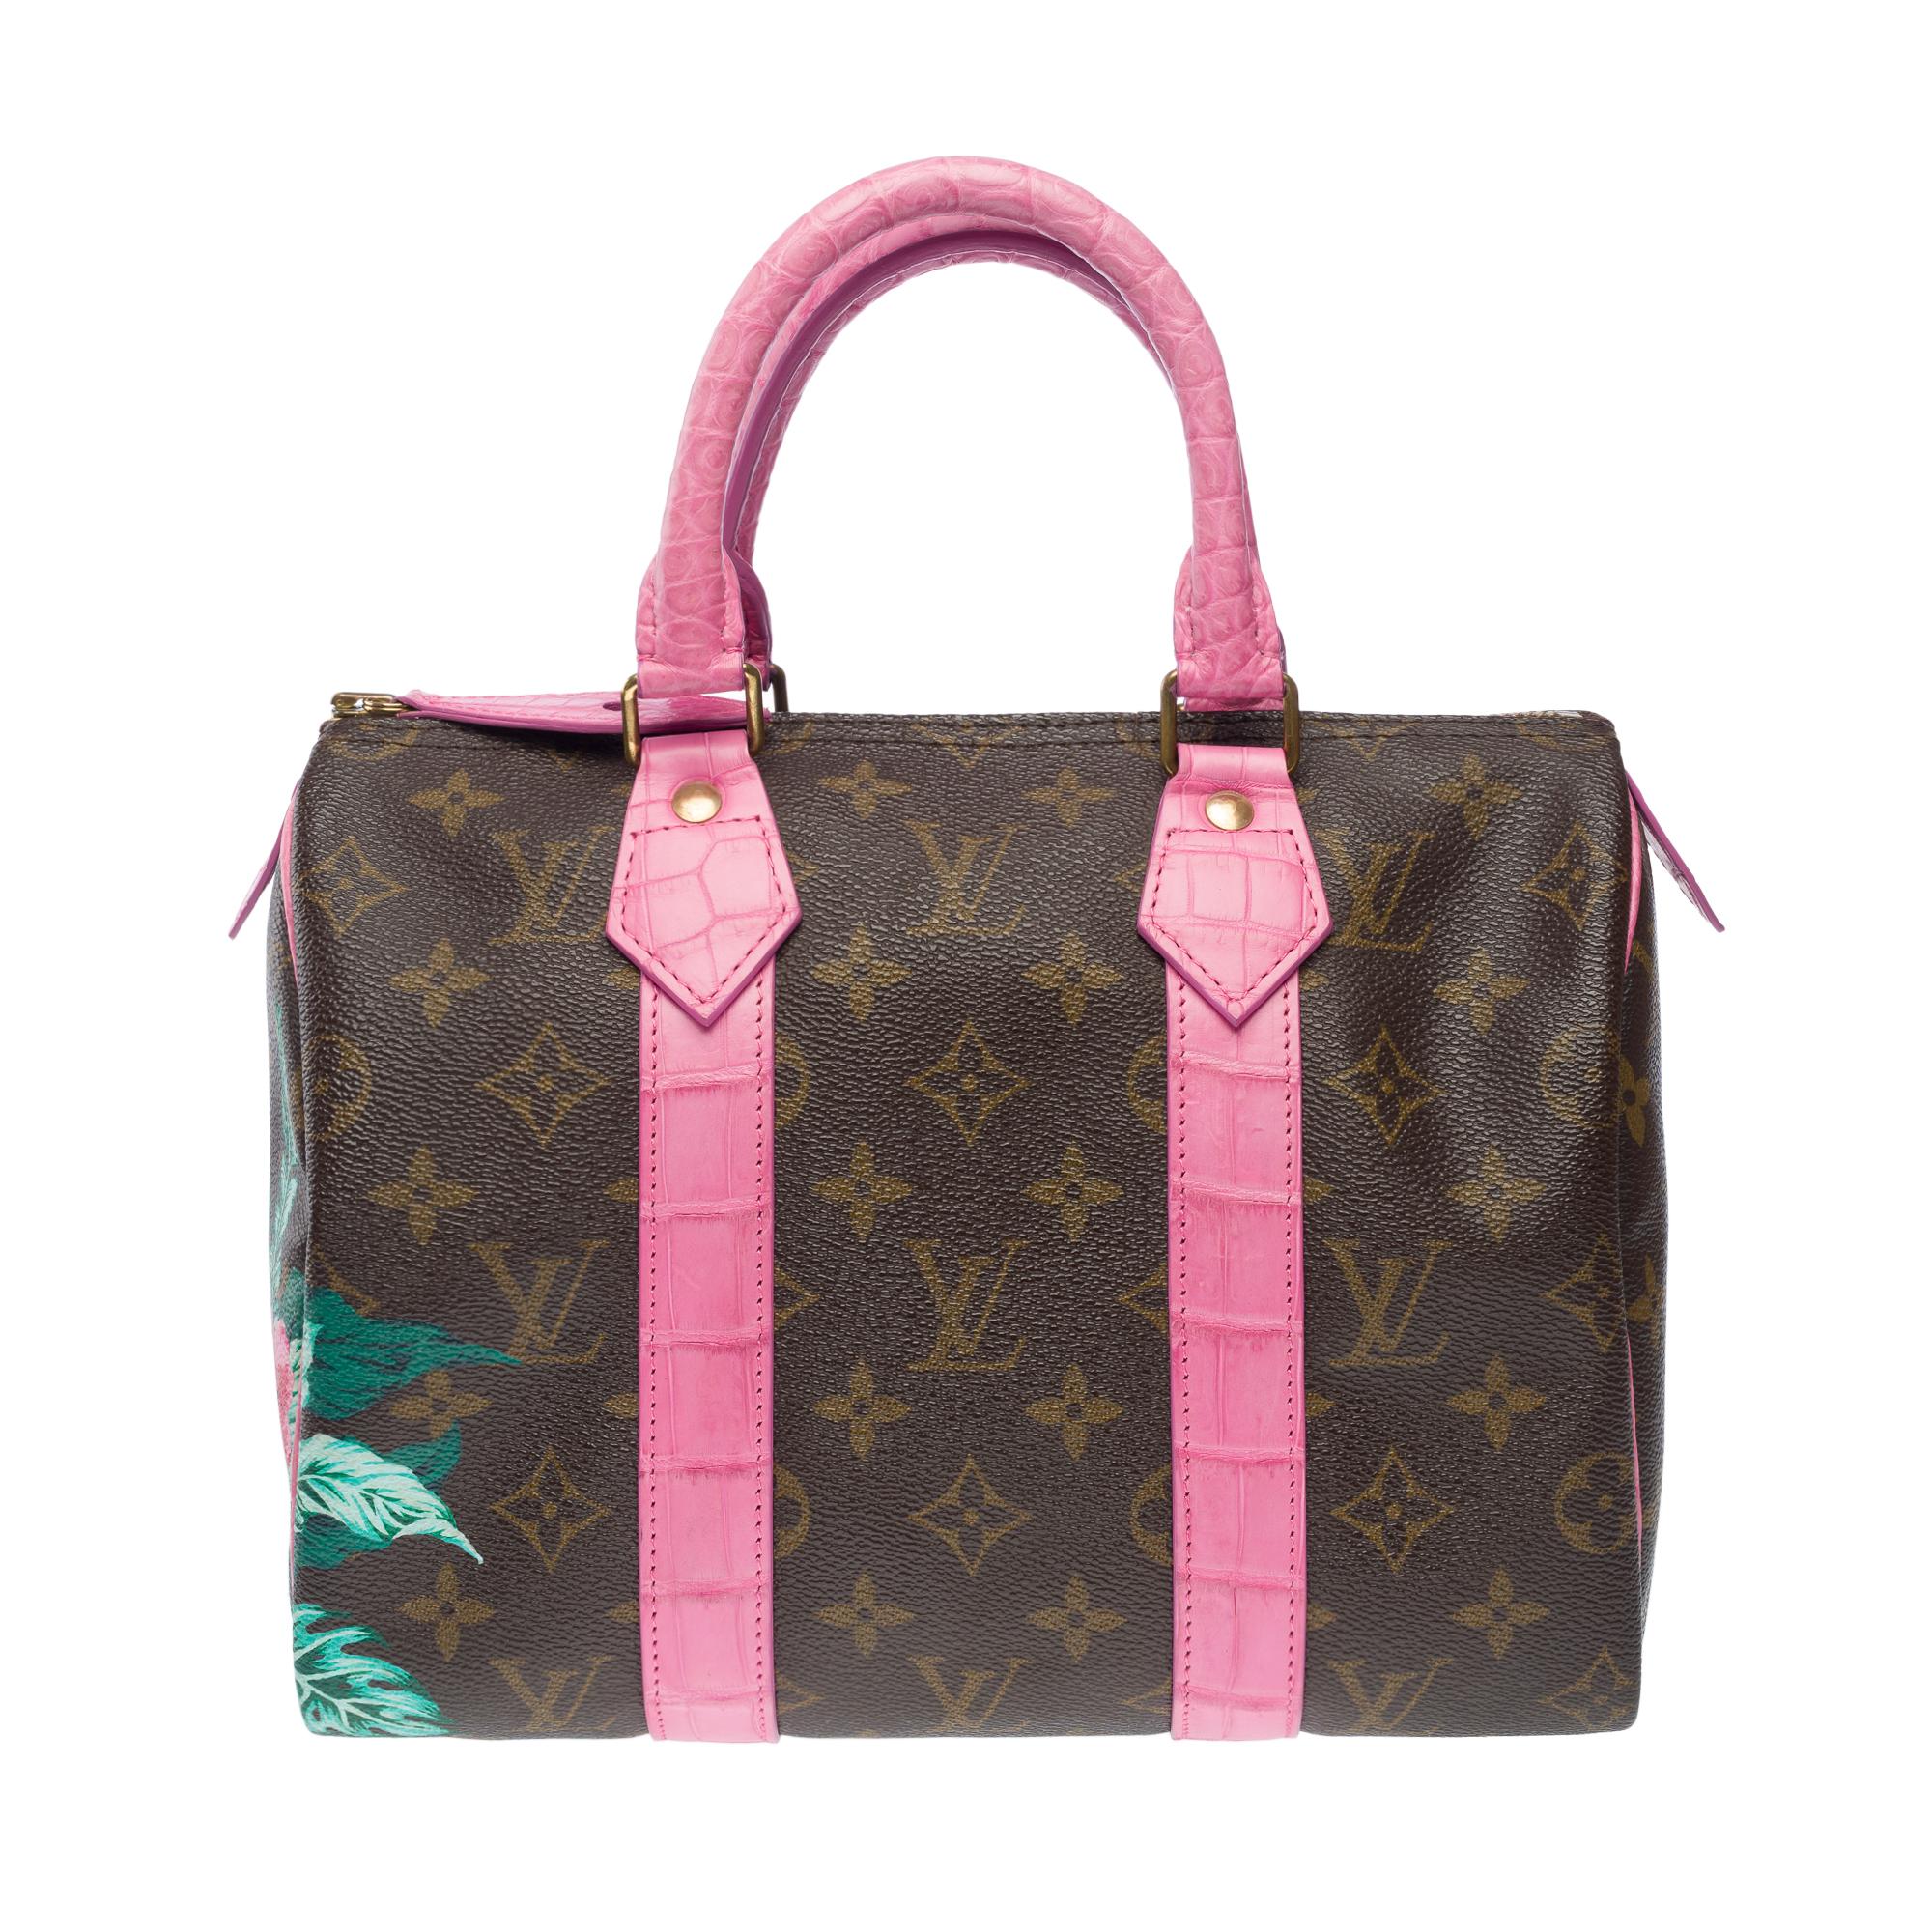 Customized Louis Vuitton Speedy 25 handbag Flowers with Pink Crocodile leather In Good Condition In Paris, IDF